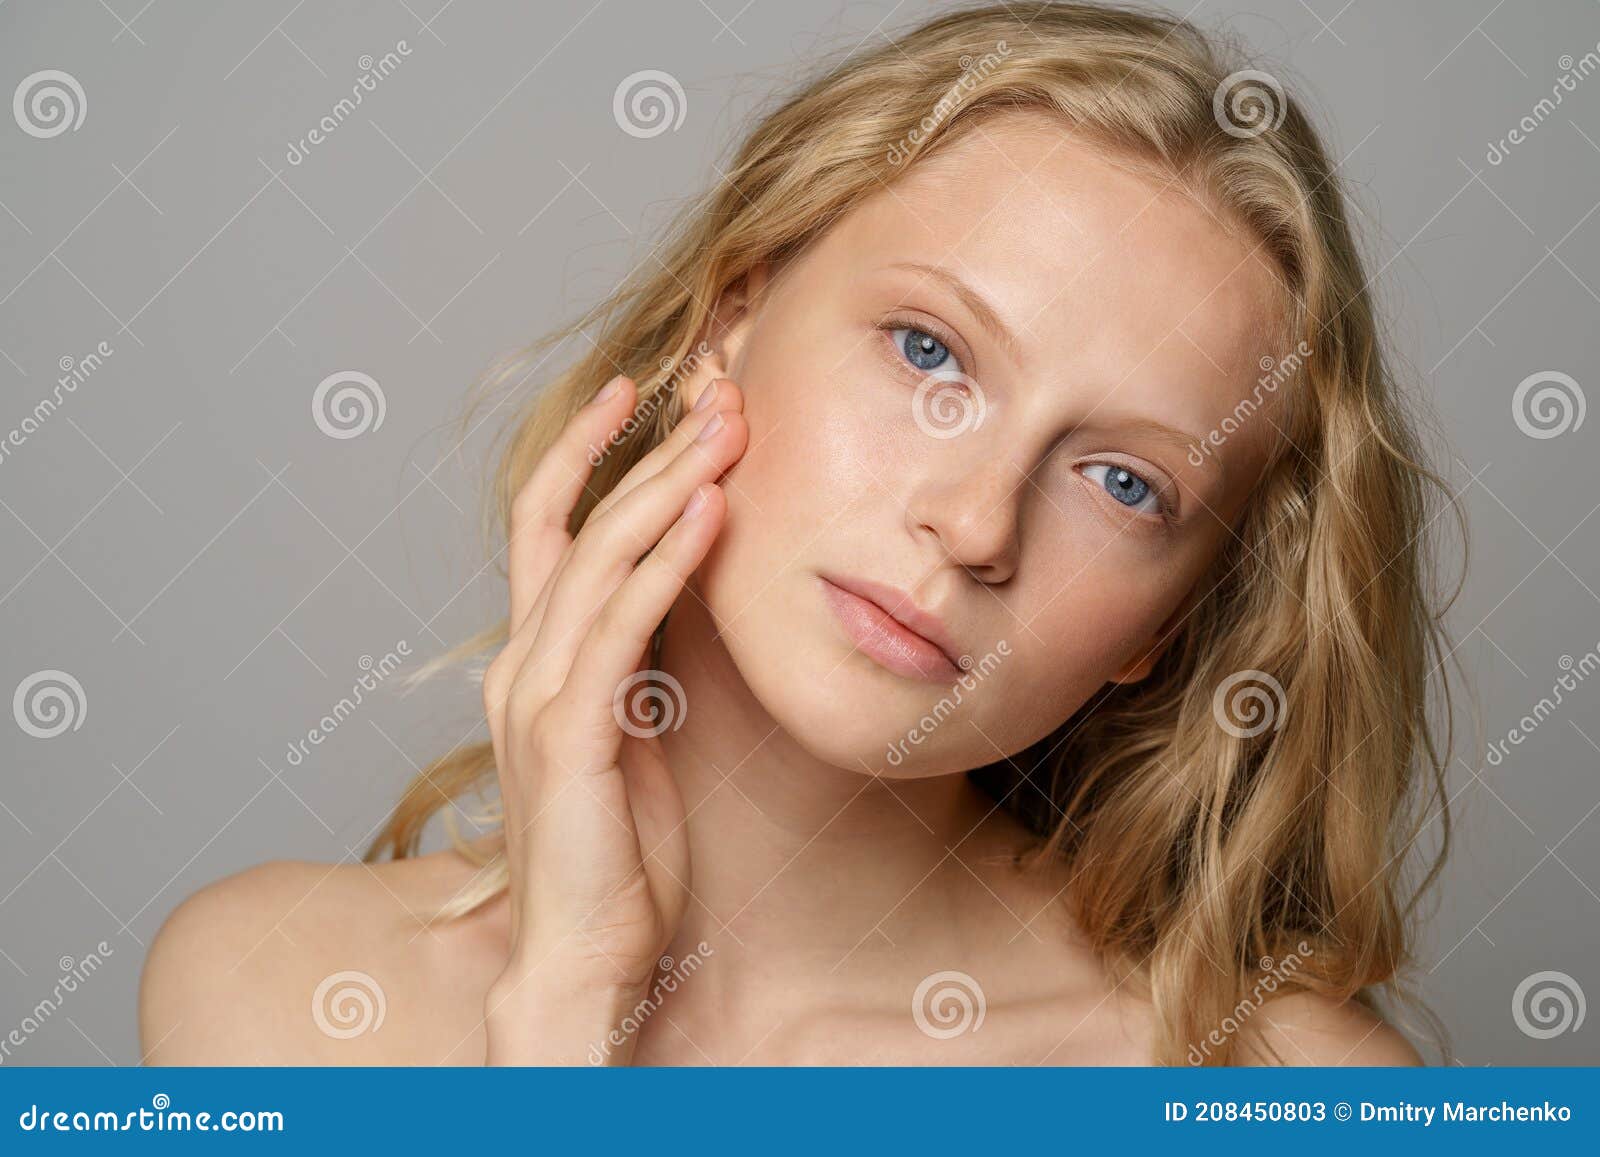 Young Woman Face with Blue Eyes Curly Natural Blonde Hair Has No Makeup  Touching Her Soft Skin Stock Image - Image of bright, amazing: 208450803